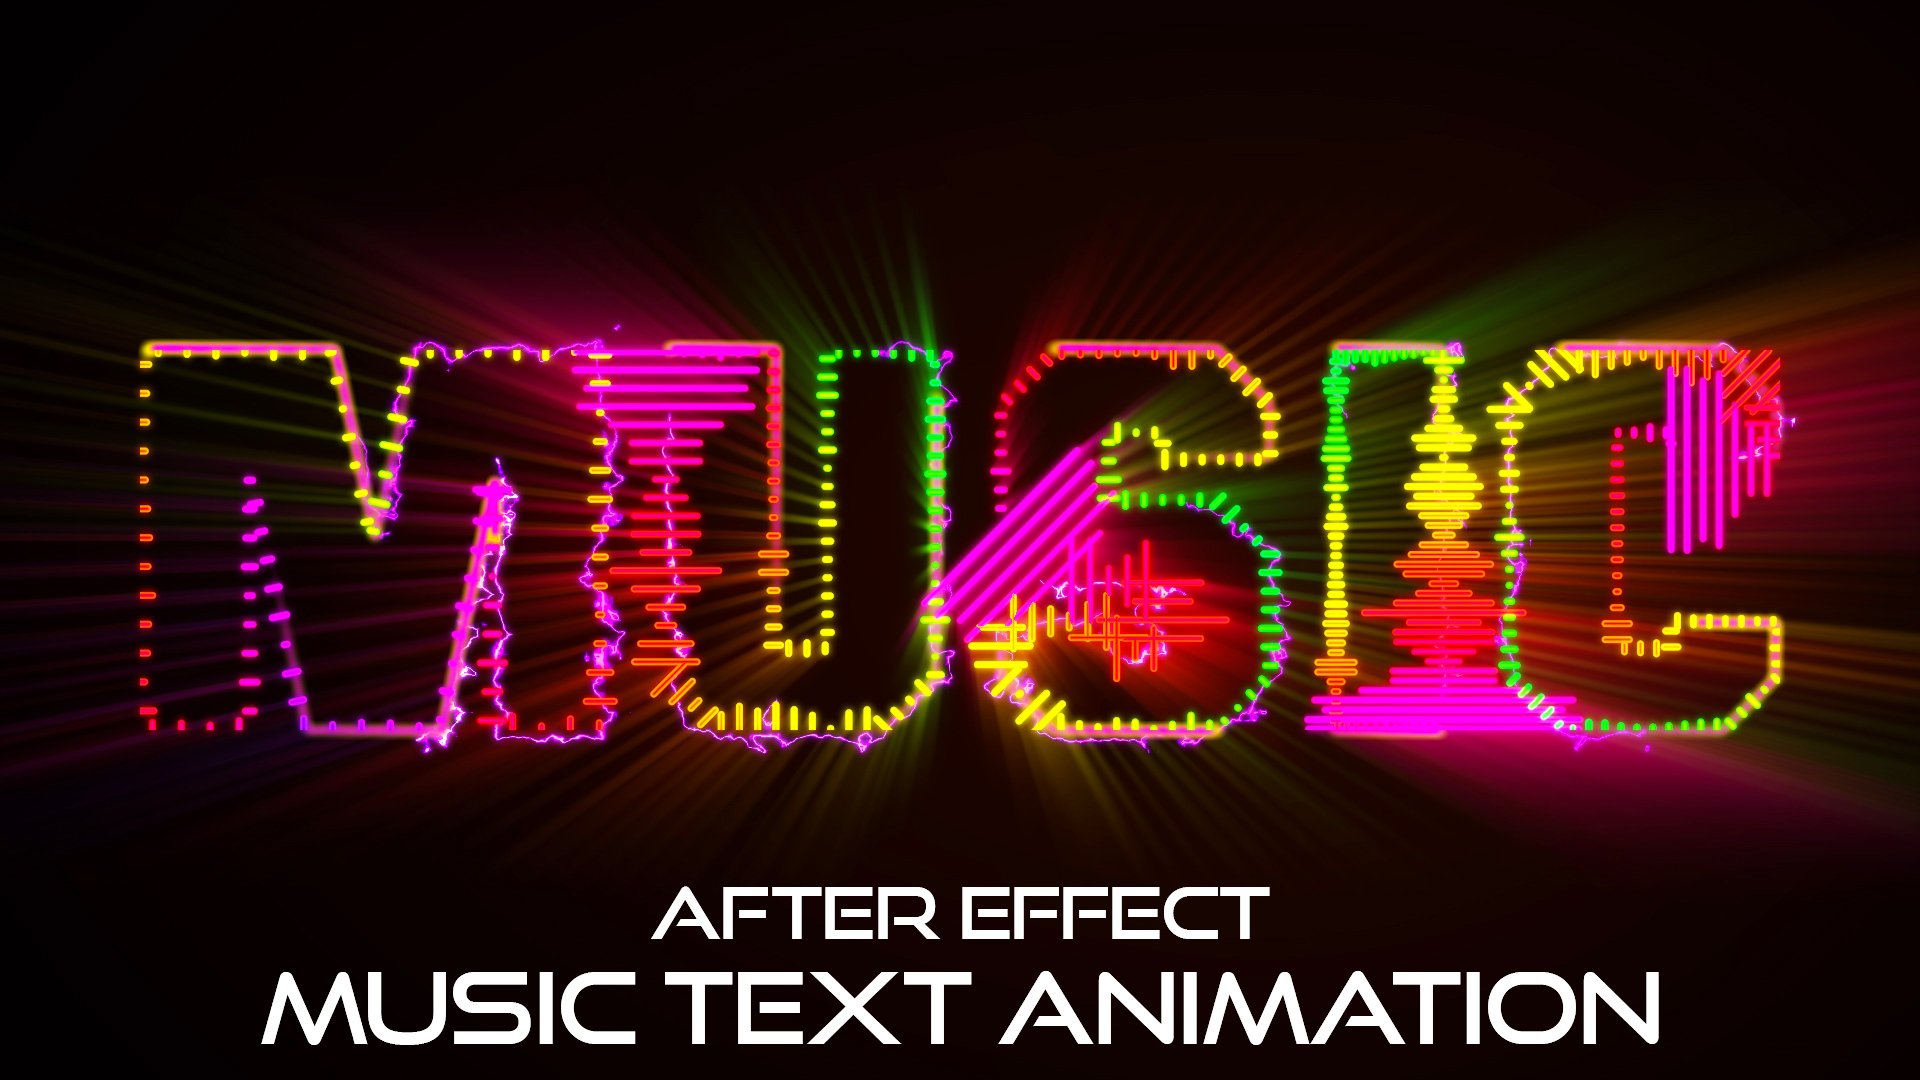 After Effects Text Tutorial - Audio Spectrum Effect in After Effects »  Fattu Tutorials